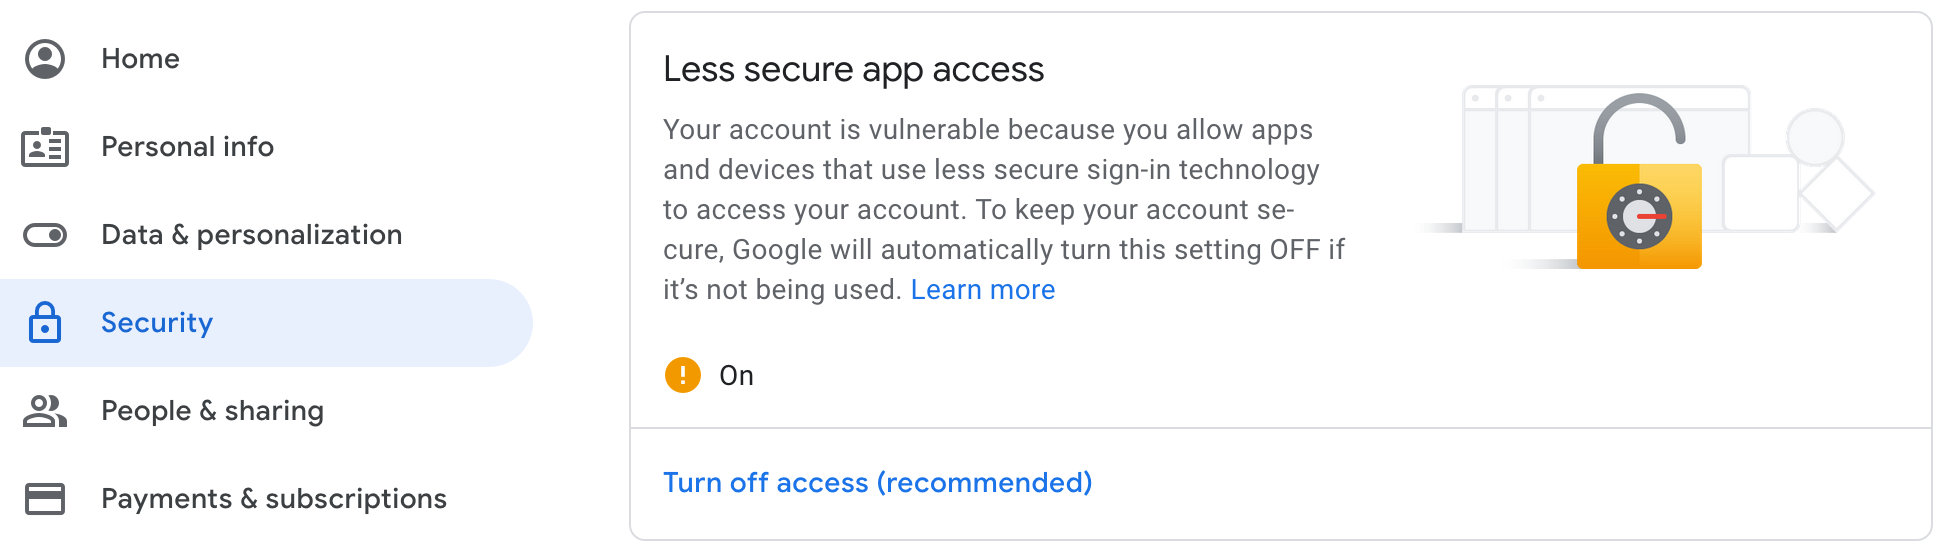 screen showing Gmail less secure app access setting